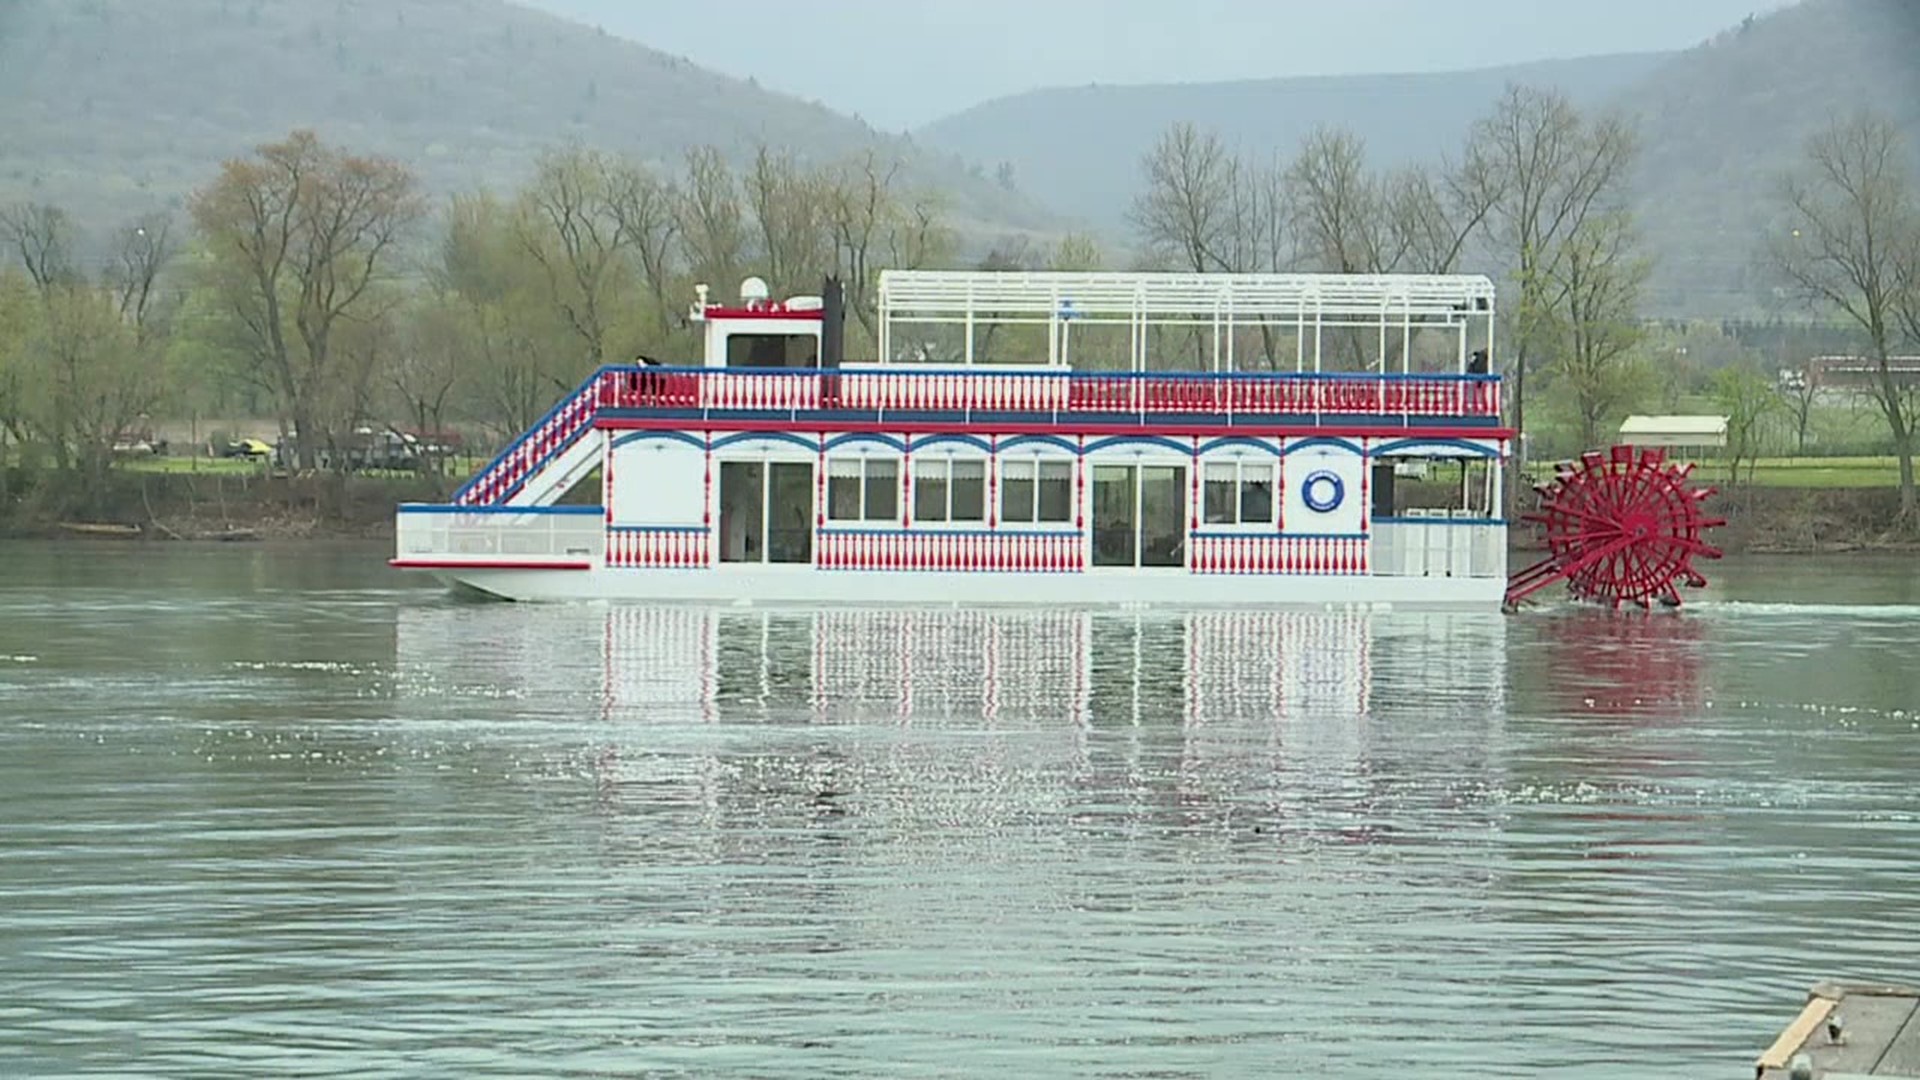 The Hiawatha Paddlewheel Riverboat is once again docked in Susquehanna State Park for another year of cruises.